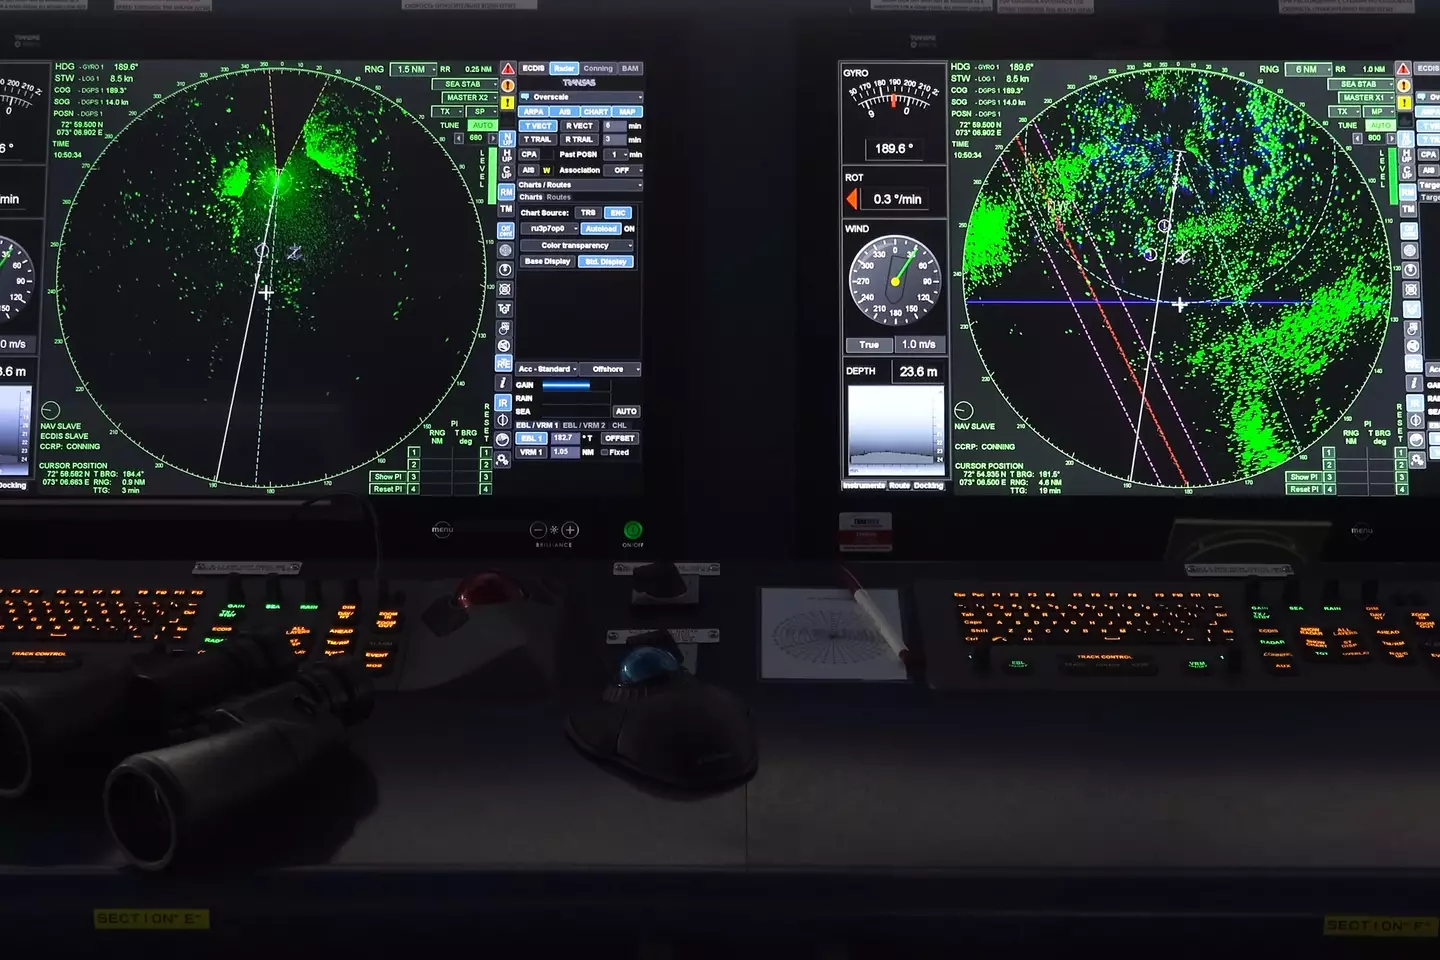 Sonar technology helps ships see and can explore large bodies of water.